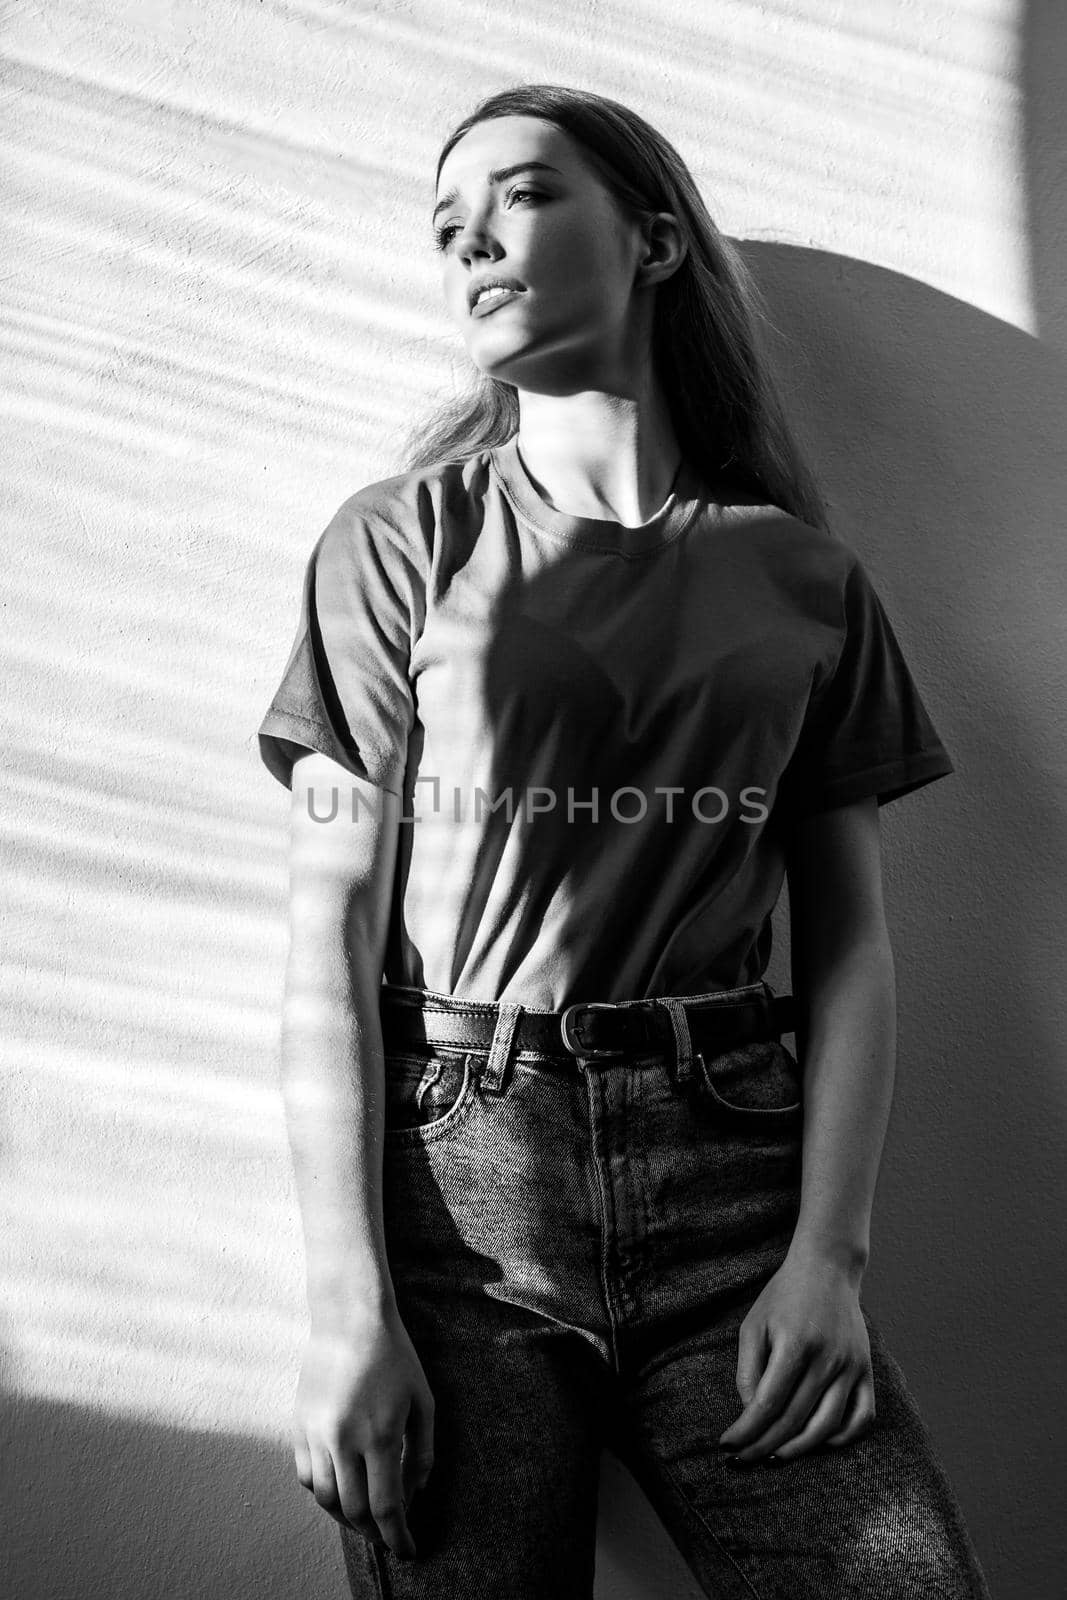 Young adult beautiful woman wearing T-shirt and jeans standing looking away with pensive romantic facial expression. Black and white photography, indoor studio shot illuminated by sunlight from window